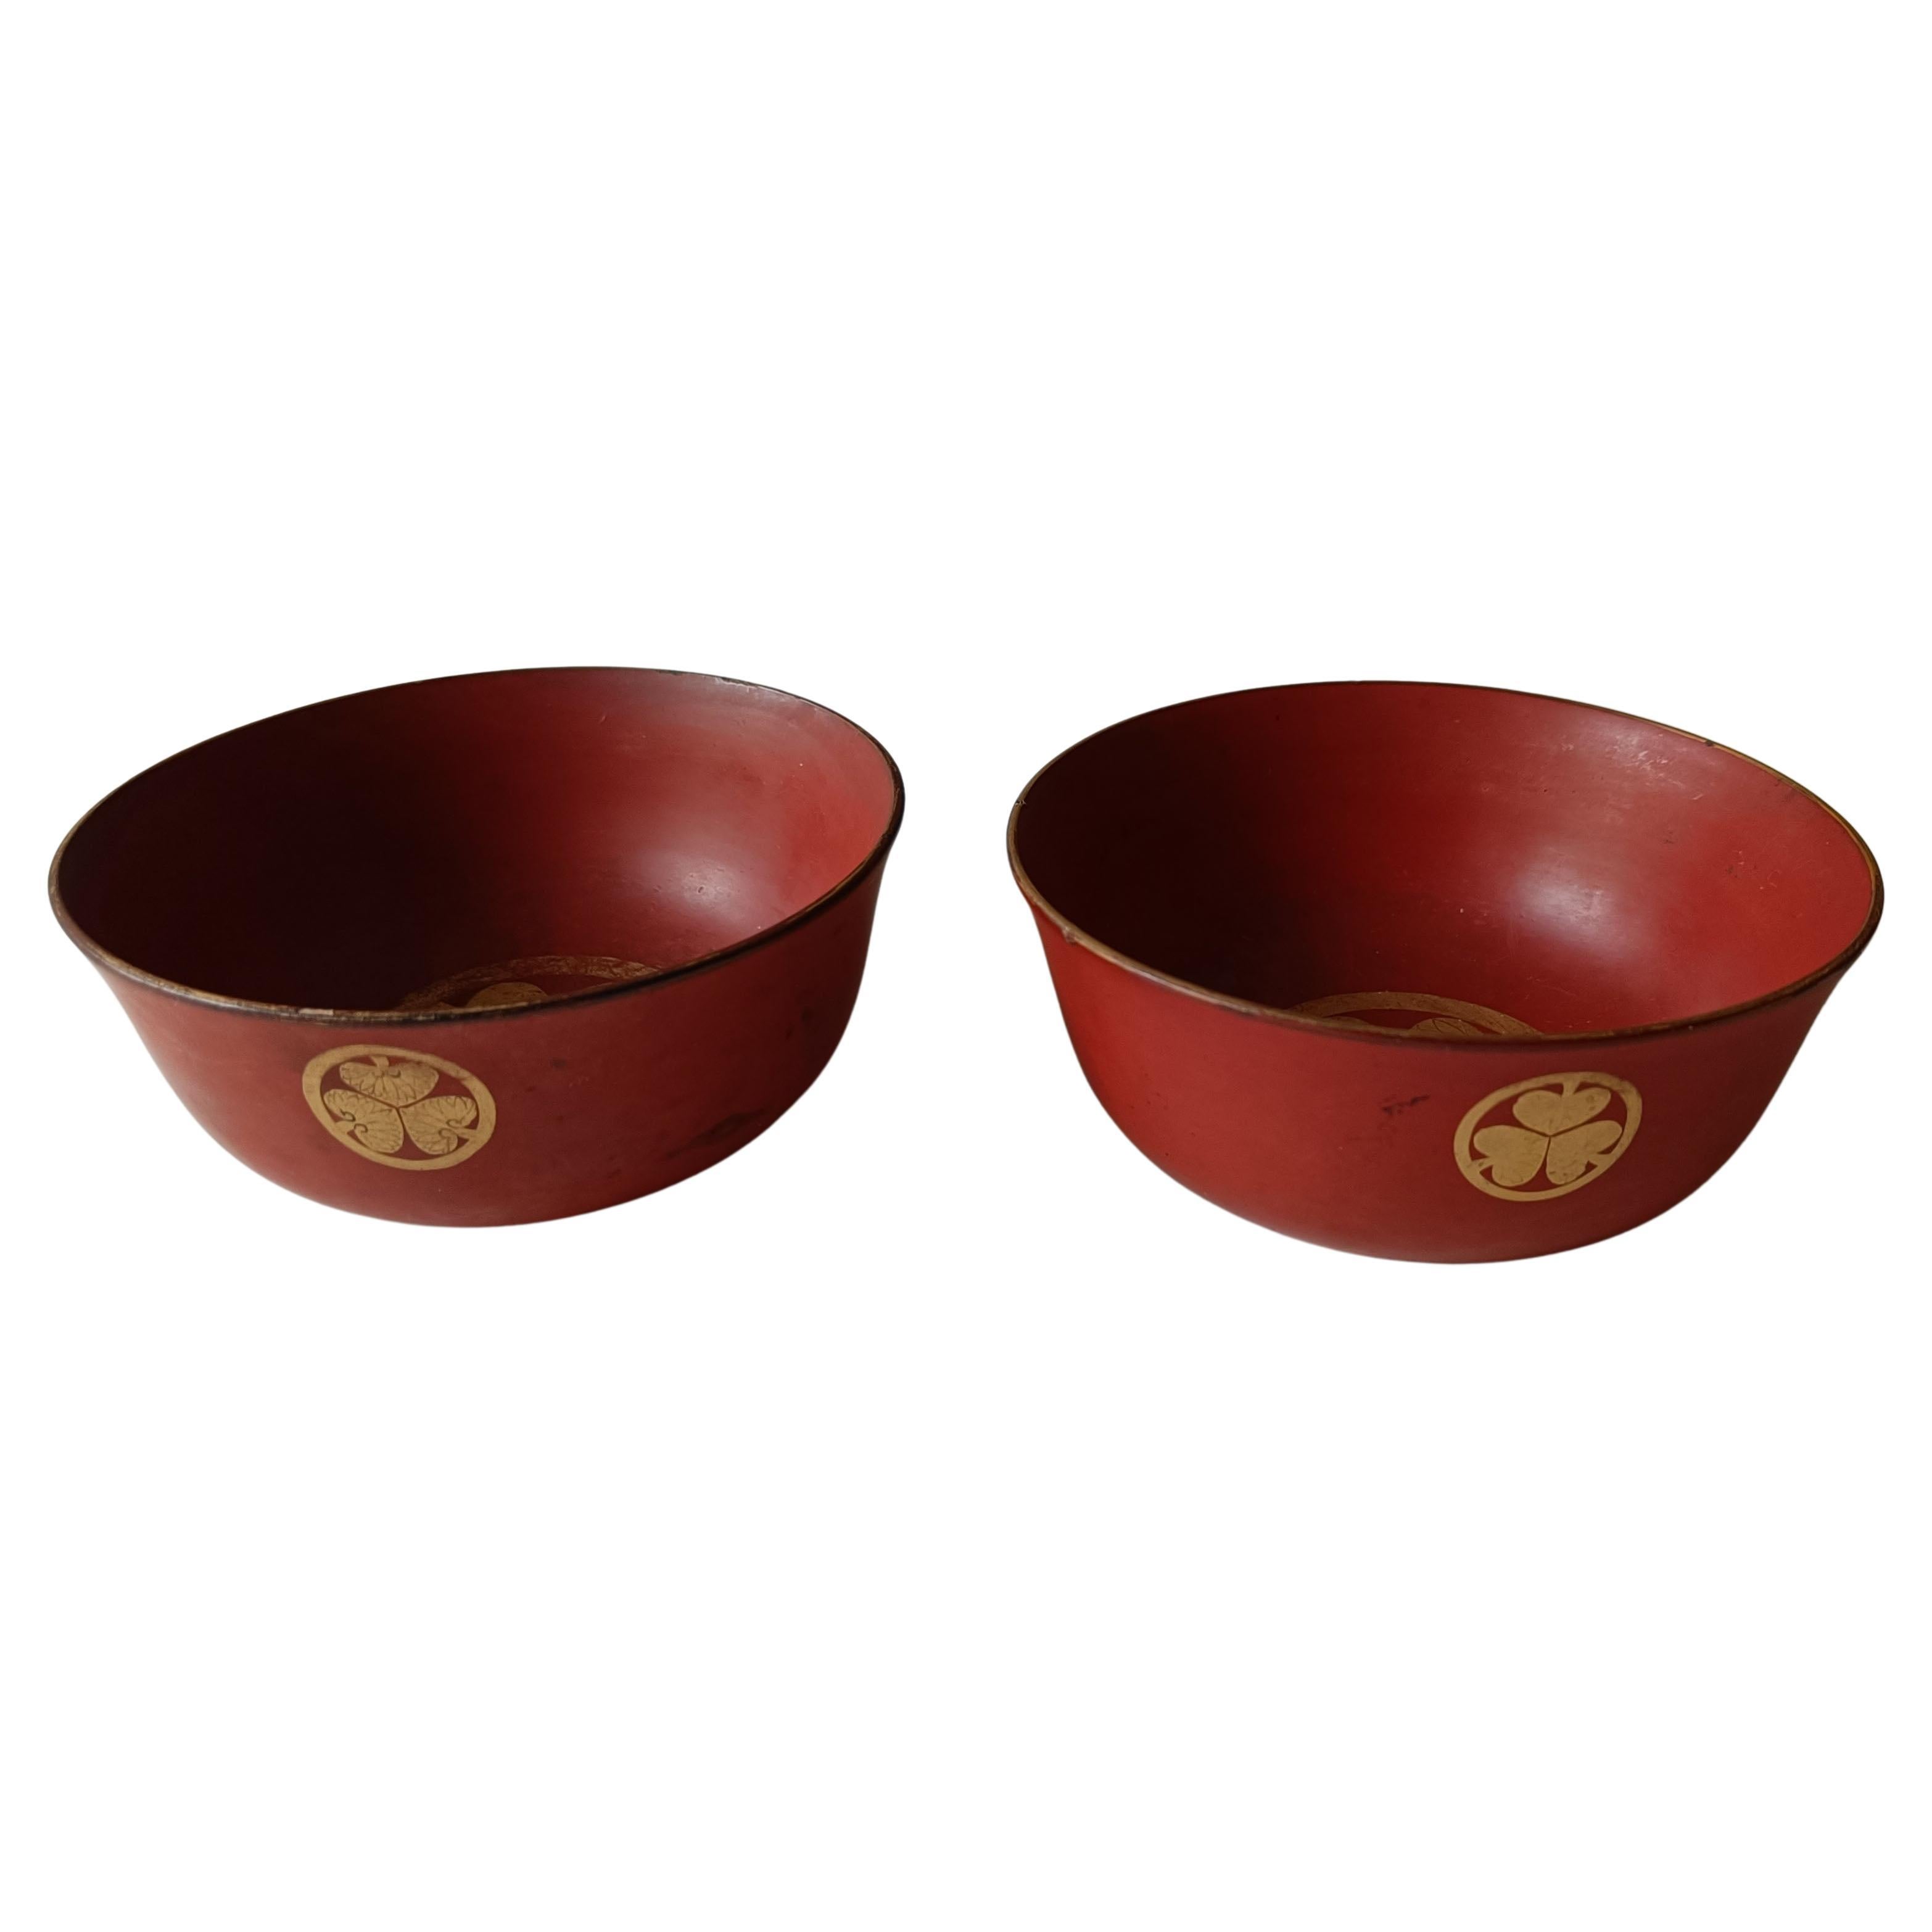 Japanese Lacquered Wood Bowls 19th Century Asian Antiques 中国古董 For Sale